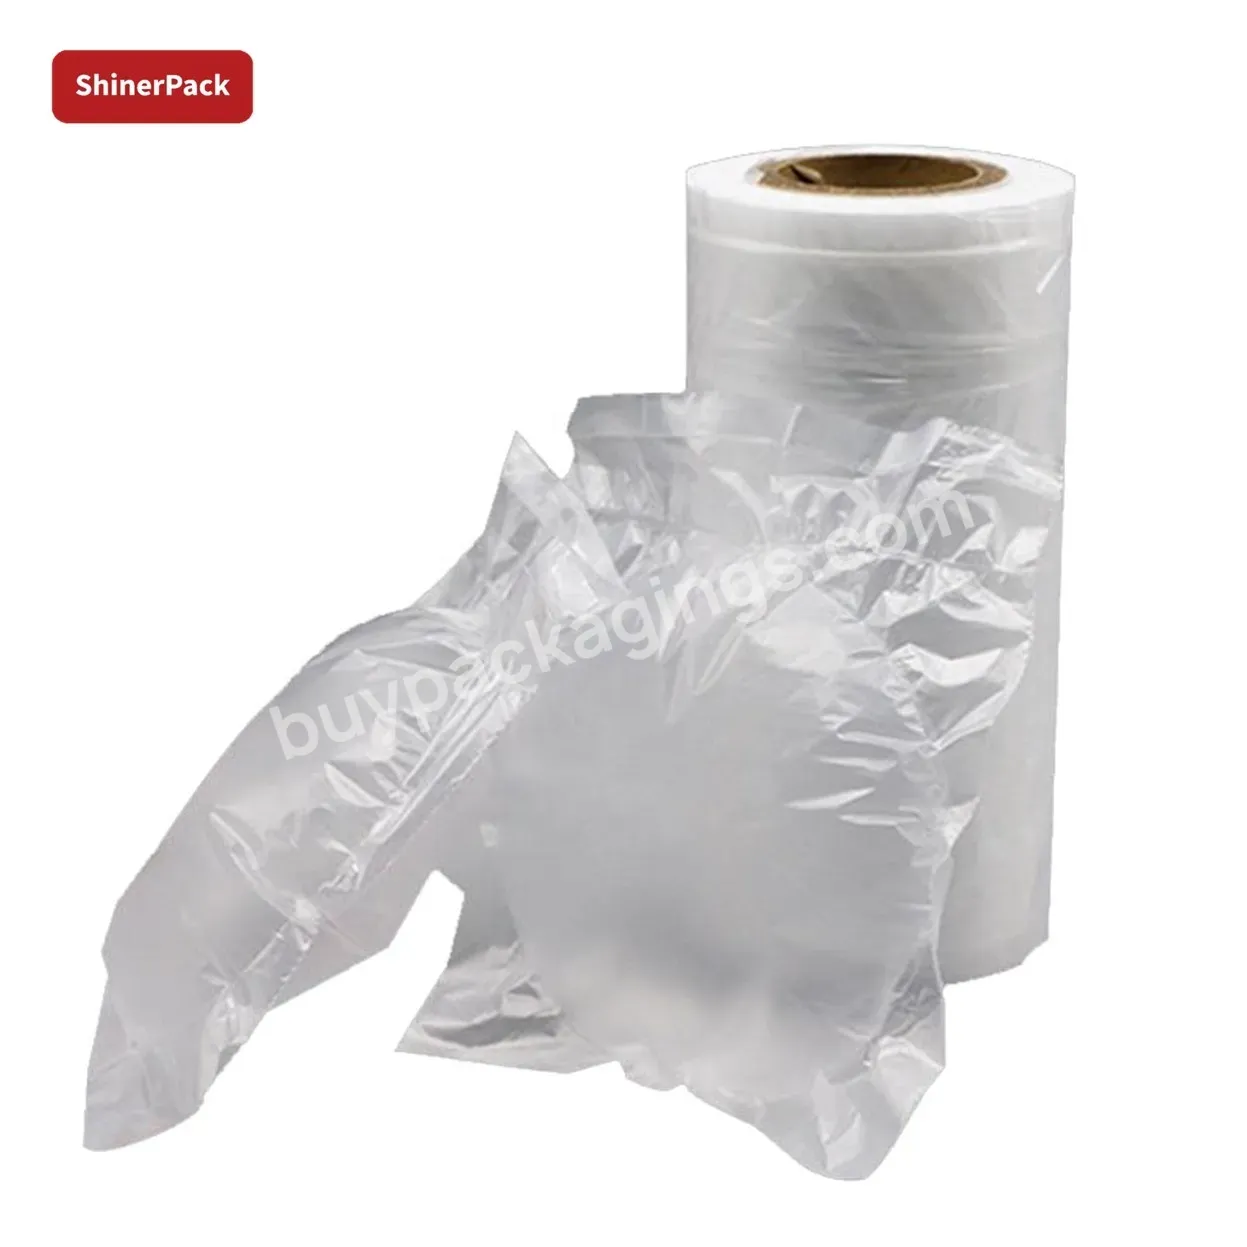 Inflatable Bra Protector For Shipping - Buy Inflatable Bra Protector For Shipping,Protector Bra,Air Packaging Films For Protecting Bra.